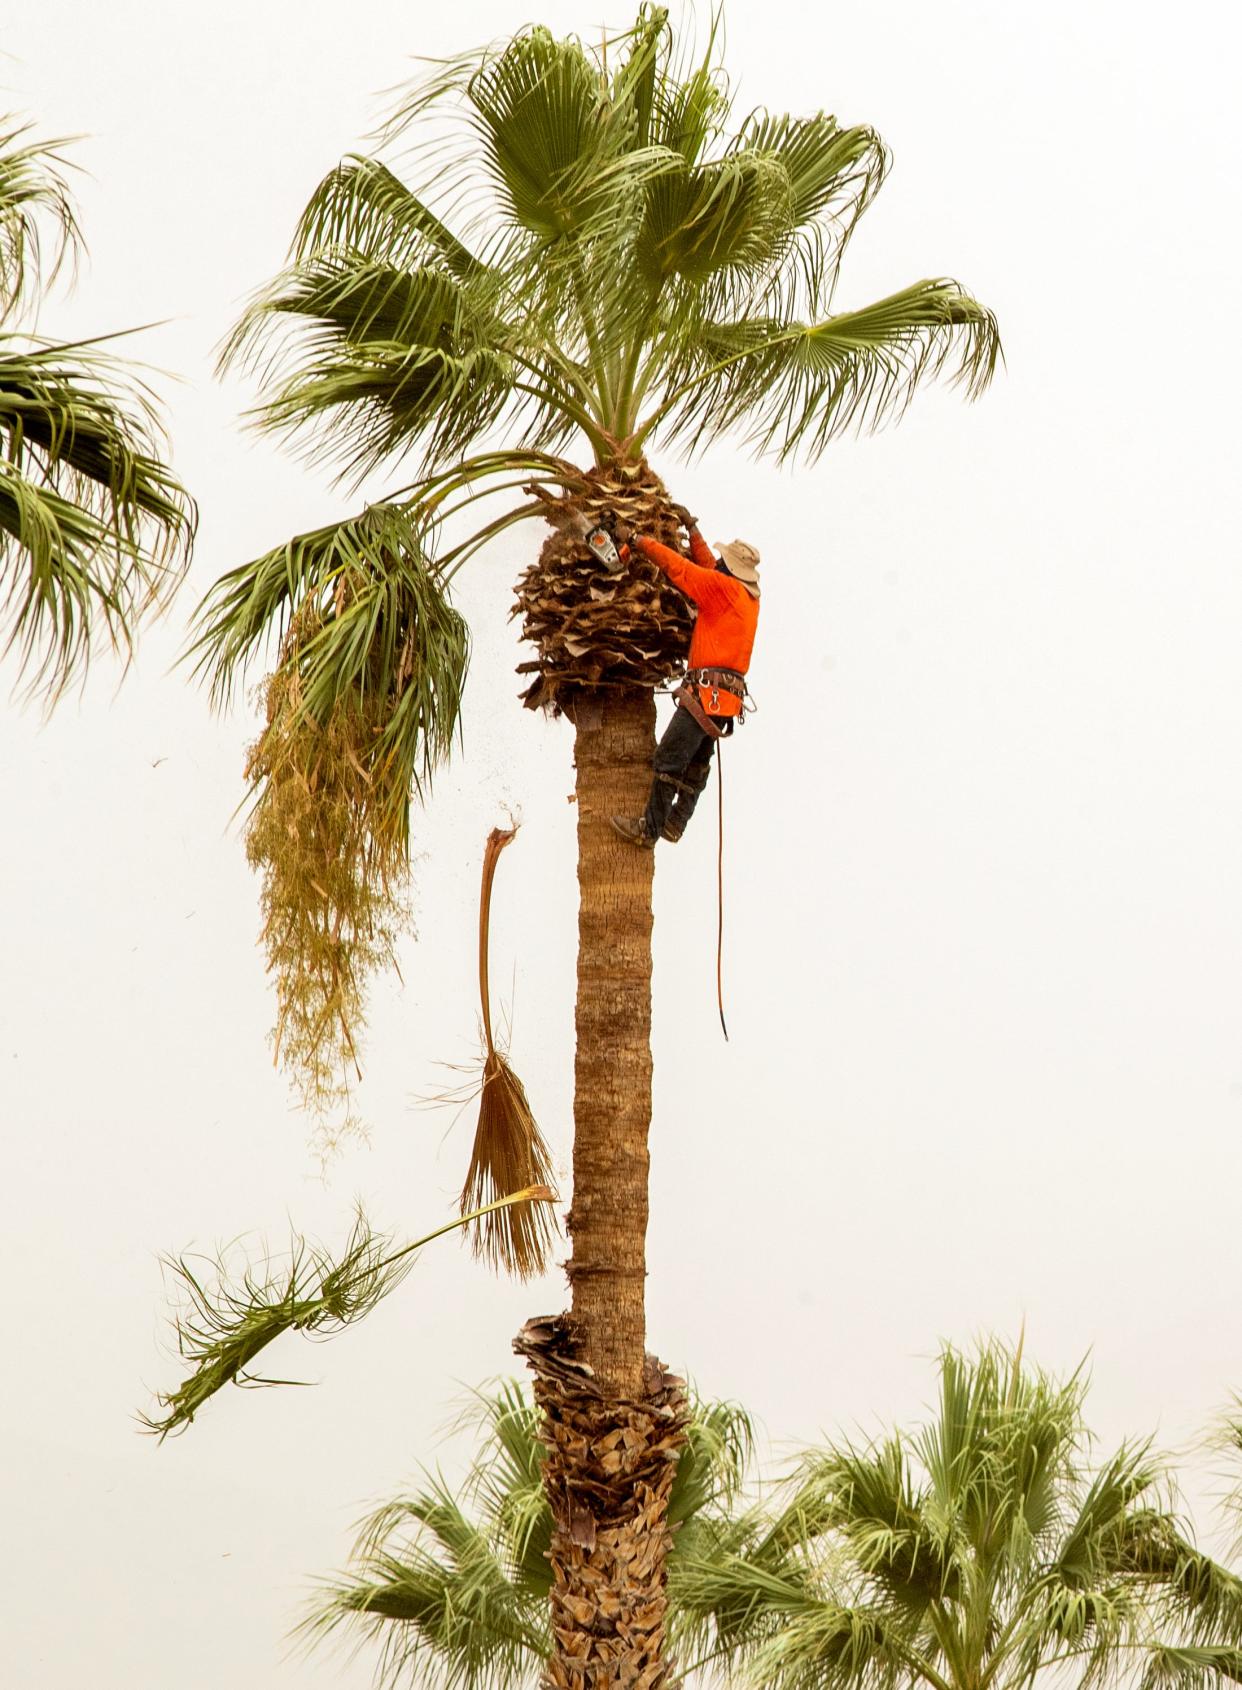 A tree trimmer works in a palm tree under a gray sky and some light rain Monday morning in Palm Springs.